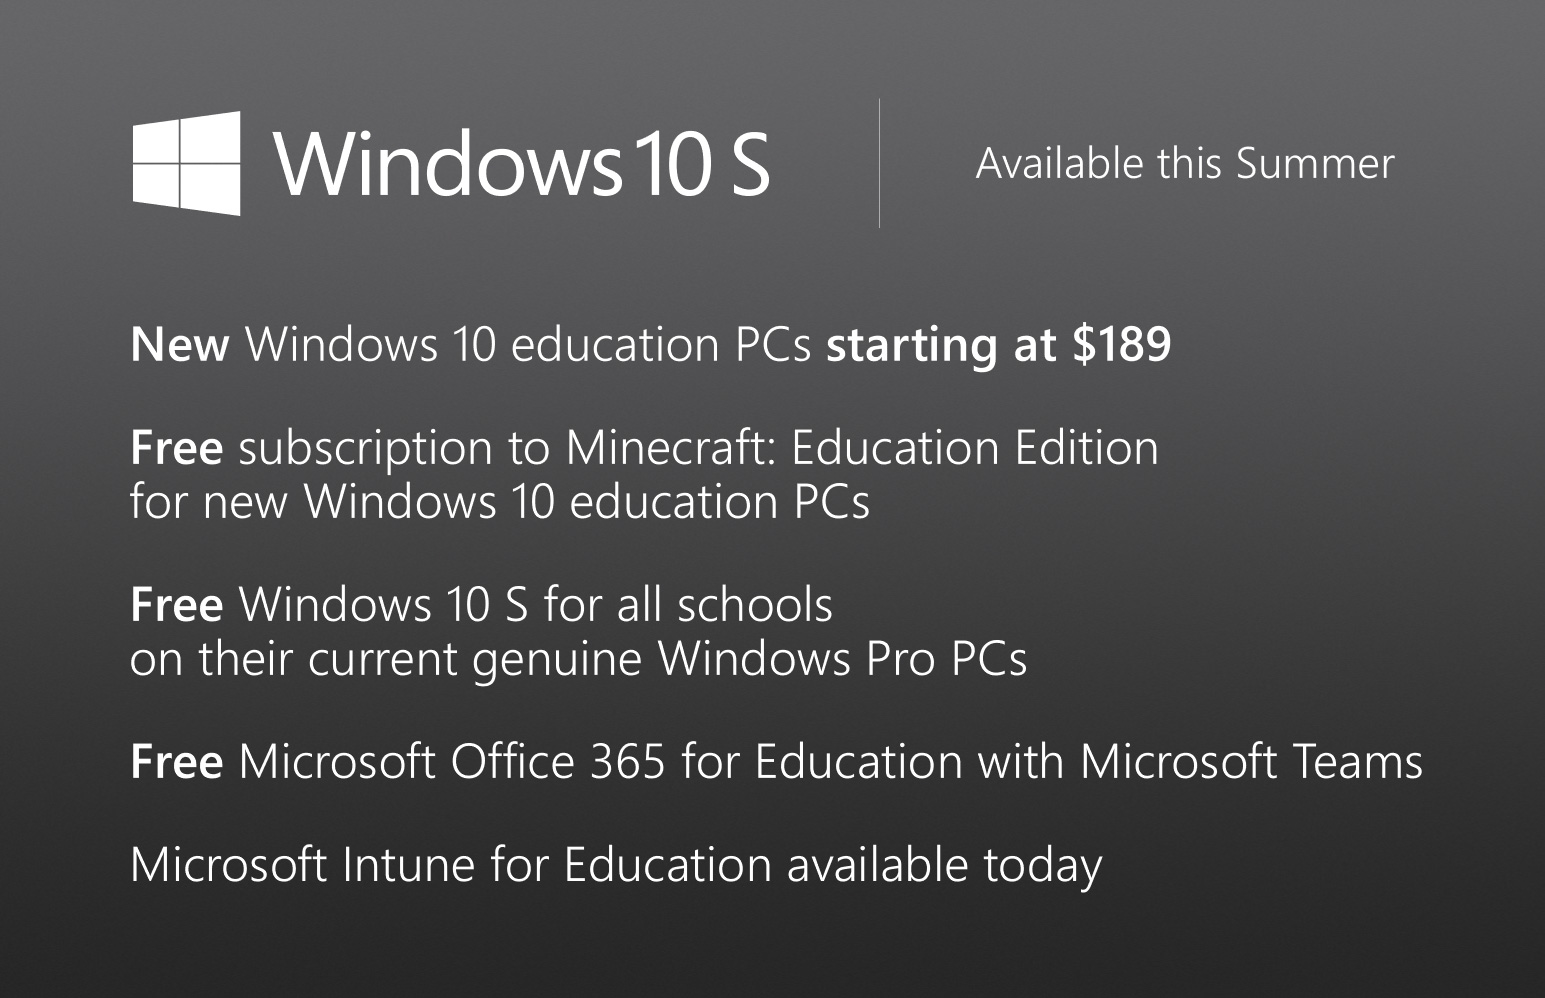 Free offers for Teachers and Students To make it easy and affordable to bring Windows 10, Office 365 for Education with Microsoft Teams and Minecraft to the classroom, we are offering teachers and students: • New Windows 10 education PCs starting at $189 • Free one-year subscription to Minecraft: Education Edition for new Windows 10 education PCs • Free Windows 10 S for all schools on any current Windows Pro PC • Free Microsoft Office 365 for Education with Microsoft Teams • Free trial of Microsoft Intune for Education